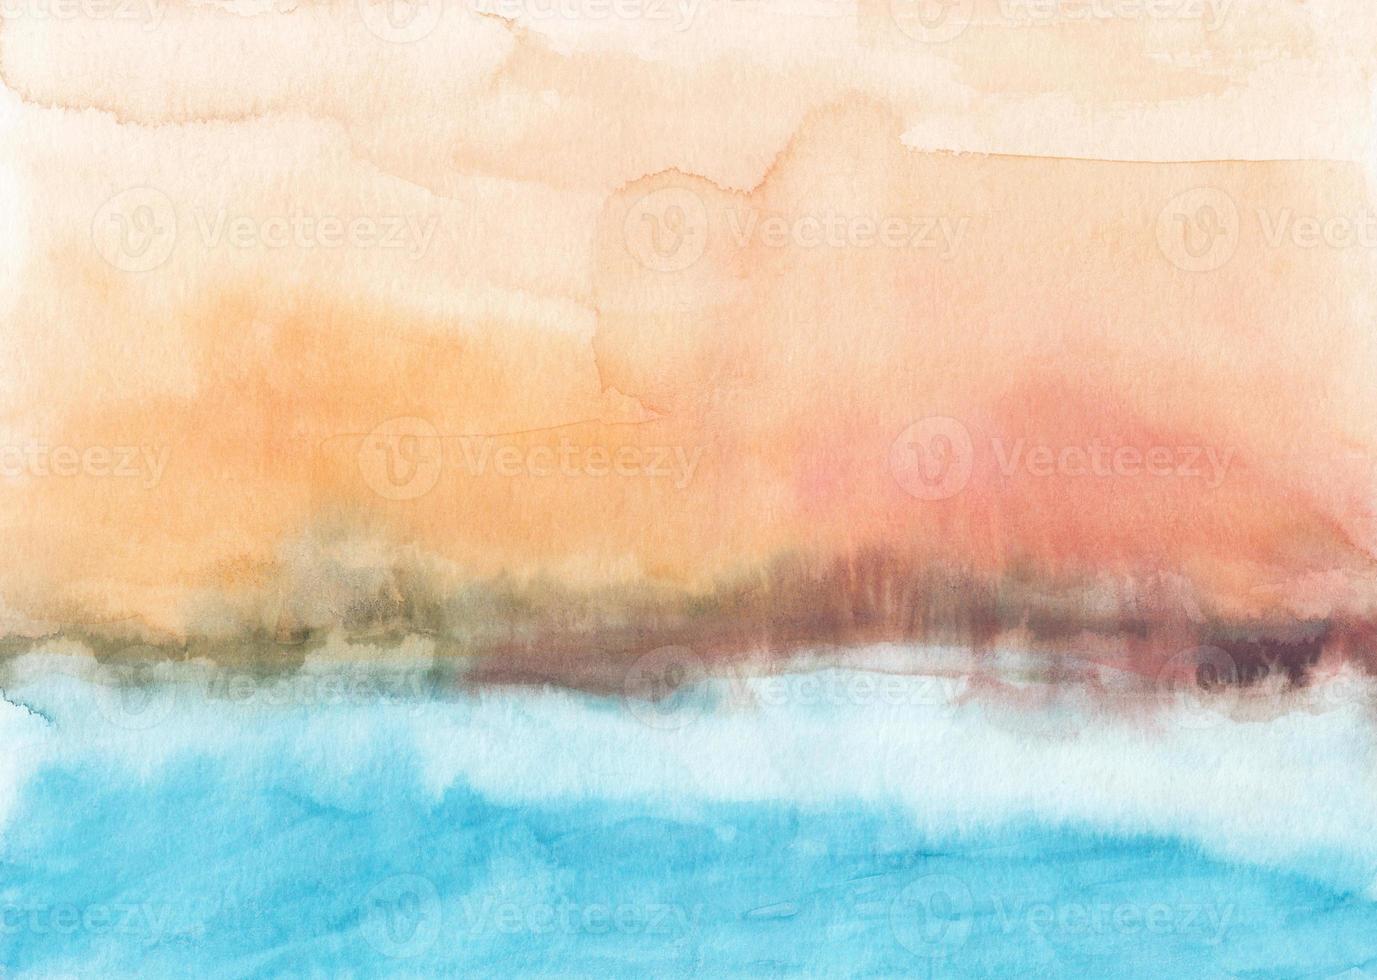 Watercolor pastel orange and blue background texture. Abstract watercolour landscape. Stains on paper, hand painted. photo